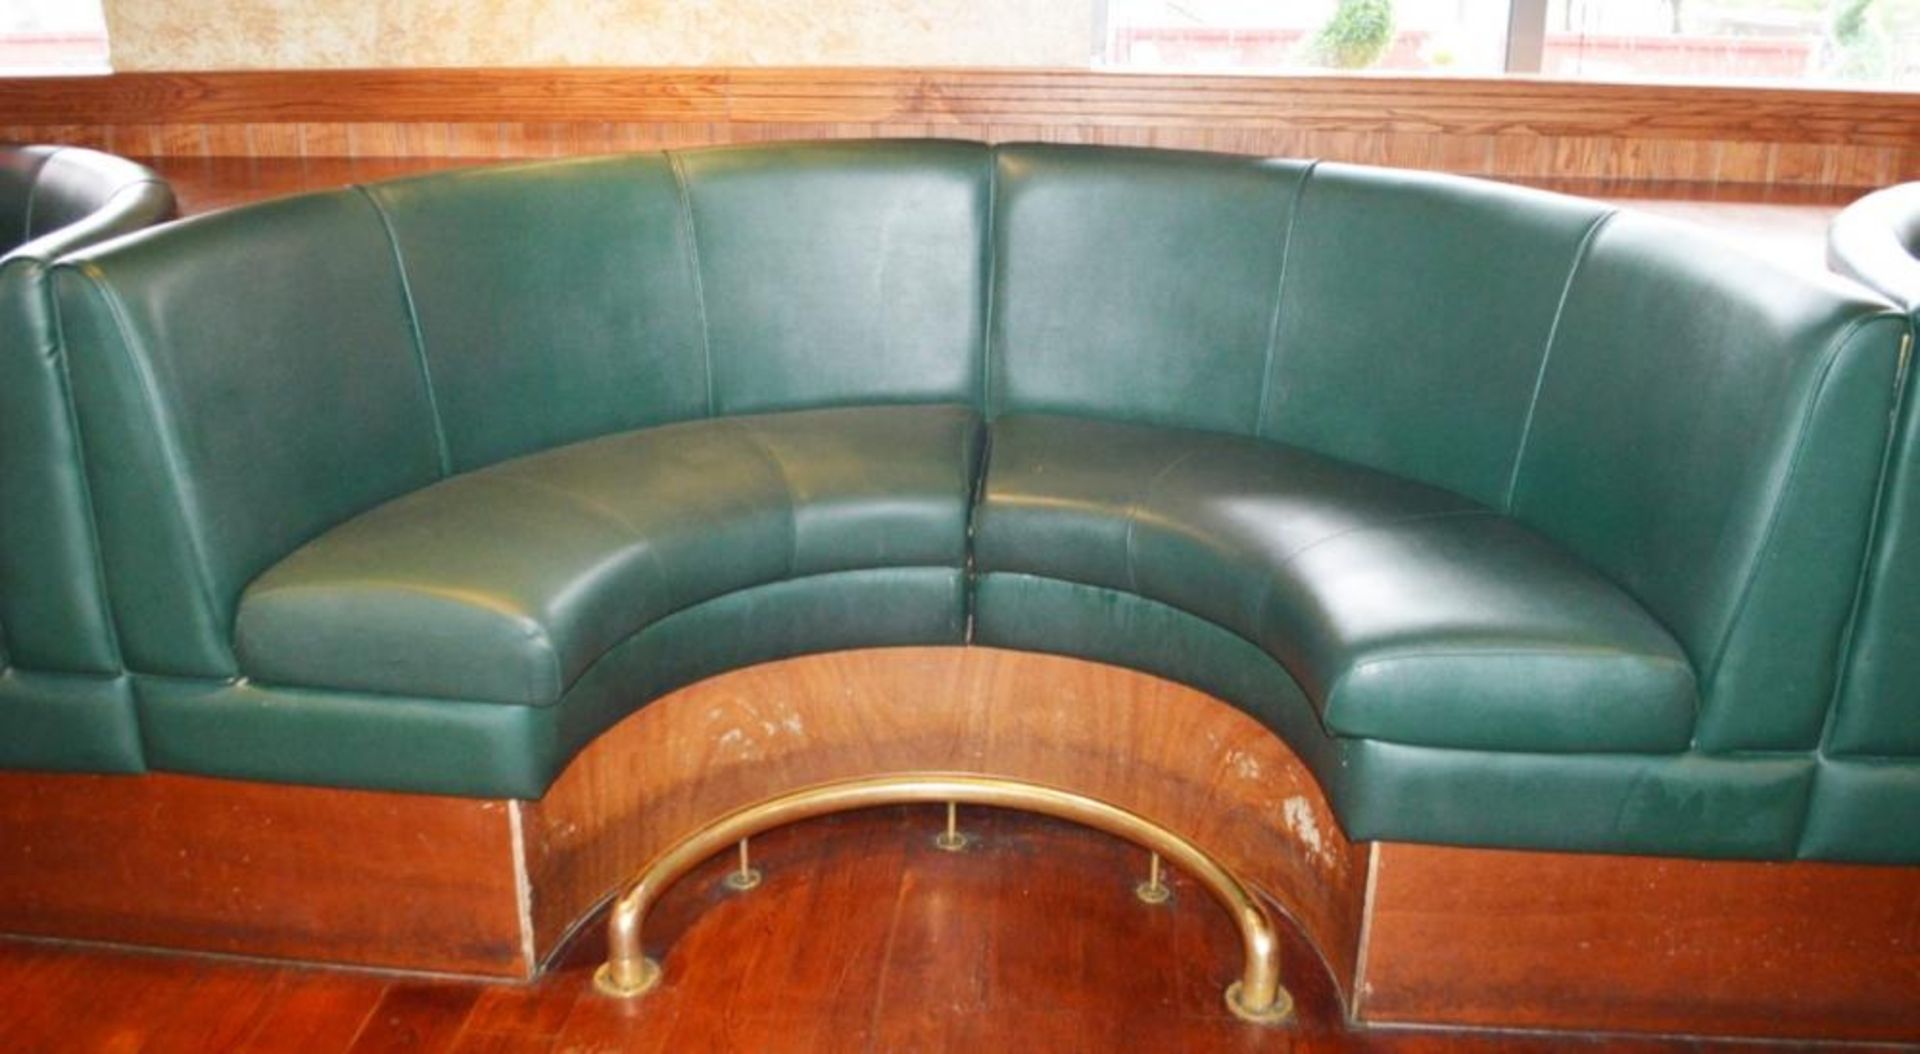 1 x Contemporary U Seating Booth With Green Faux Leather Upholstery and Brass Foot Rest - H105 x W22